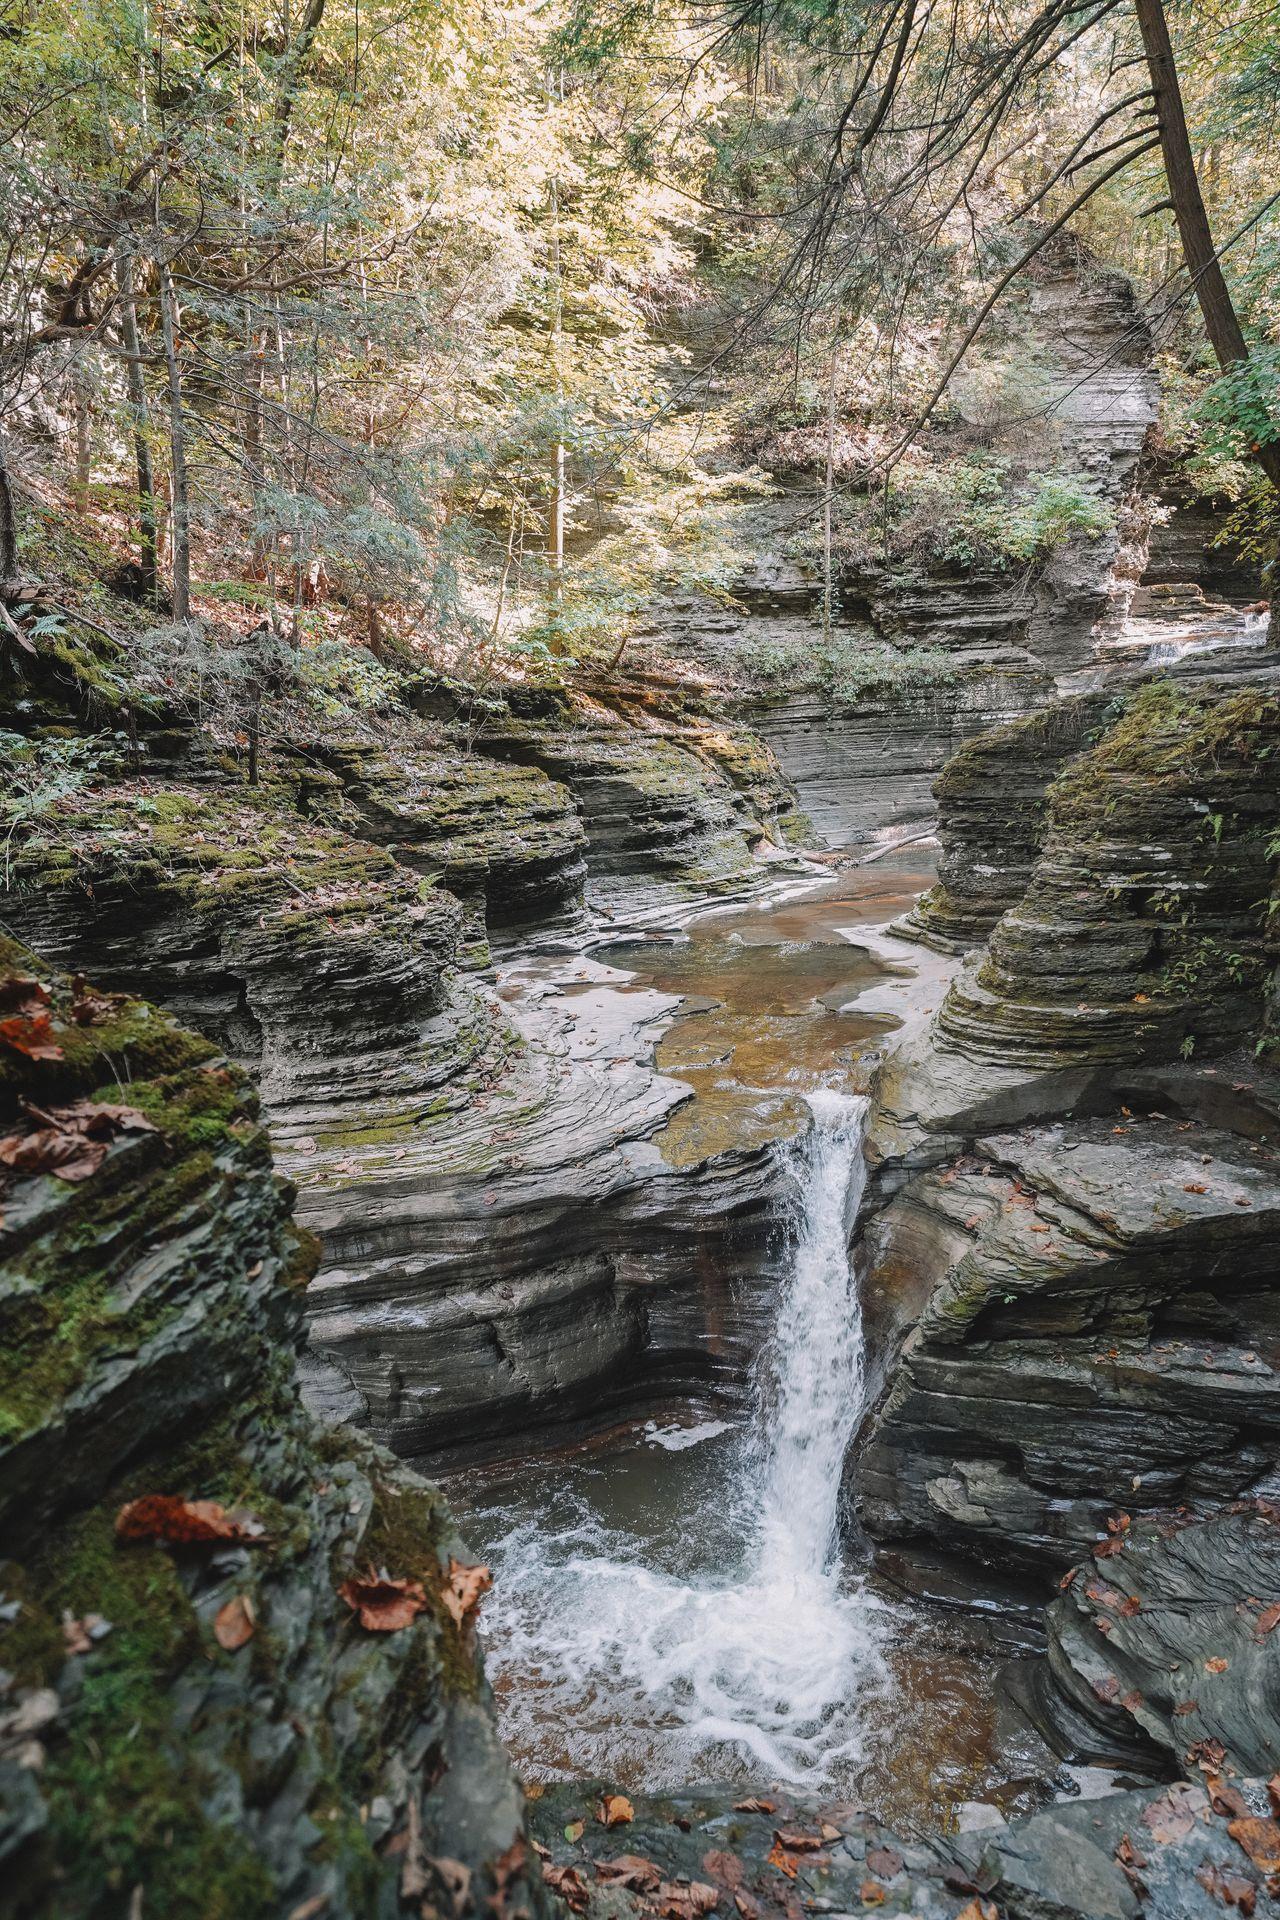 A narrow waterfall surrounded by gorge walls that are made up of many layers.